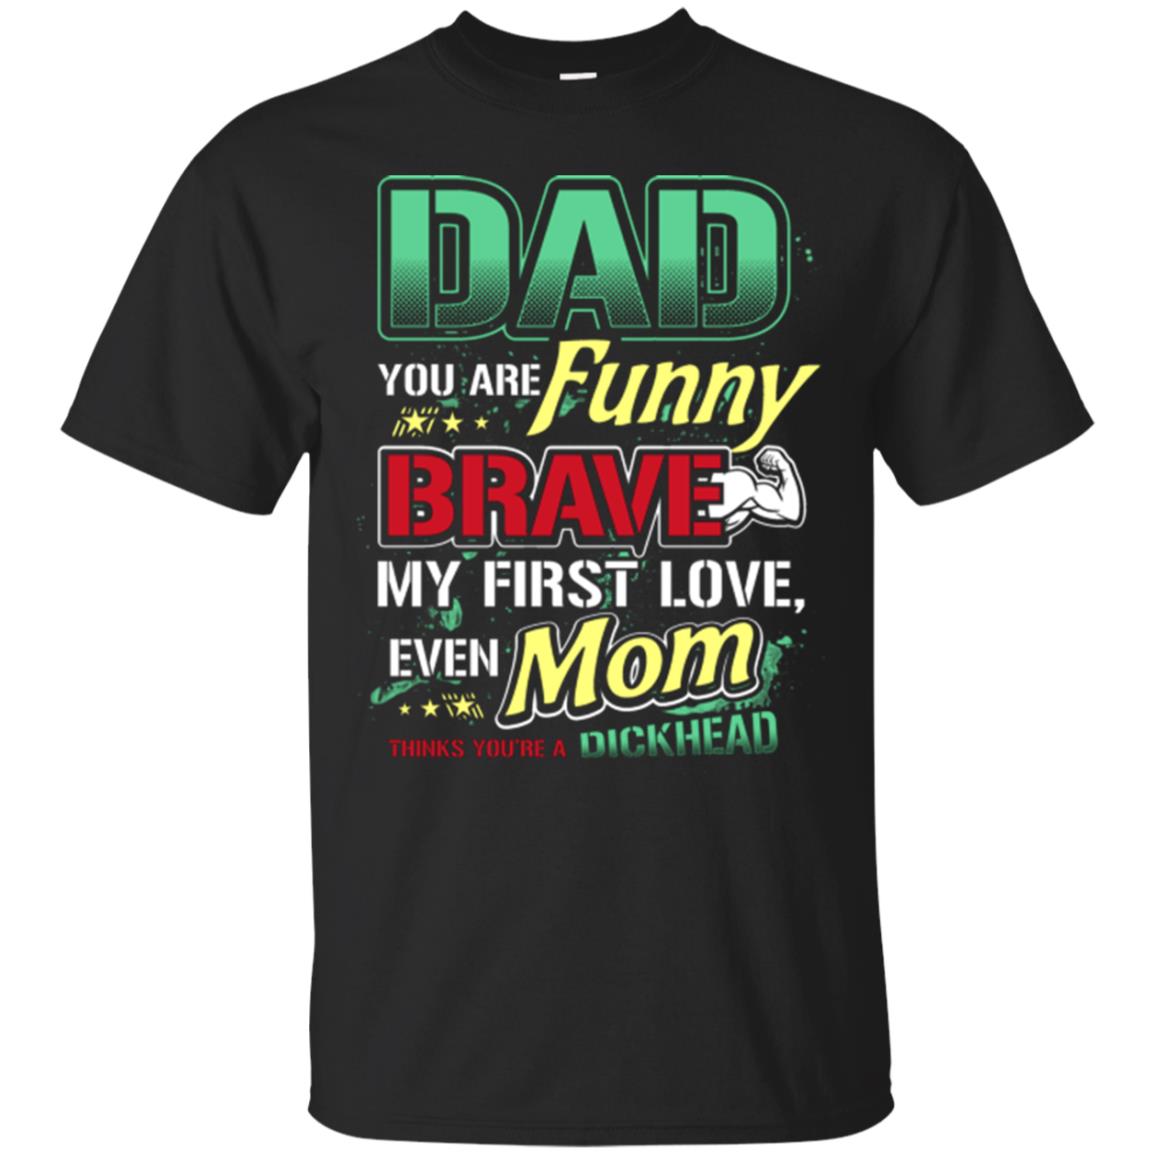 Dad You Are Funny Brave My First Love, Even Mom Thinks You're A DickheadG200 Gildan Ultra Cotton T-Shirt